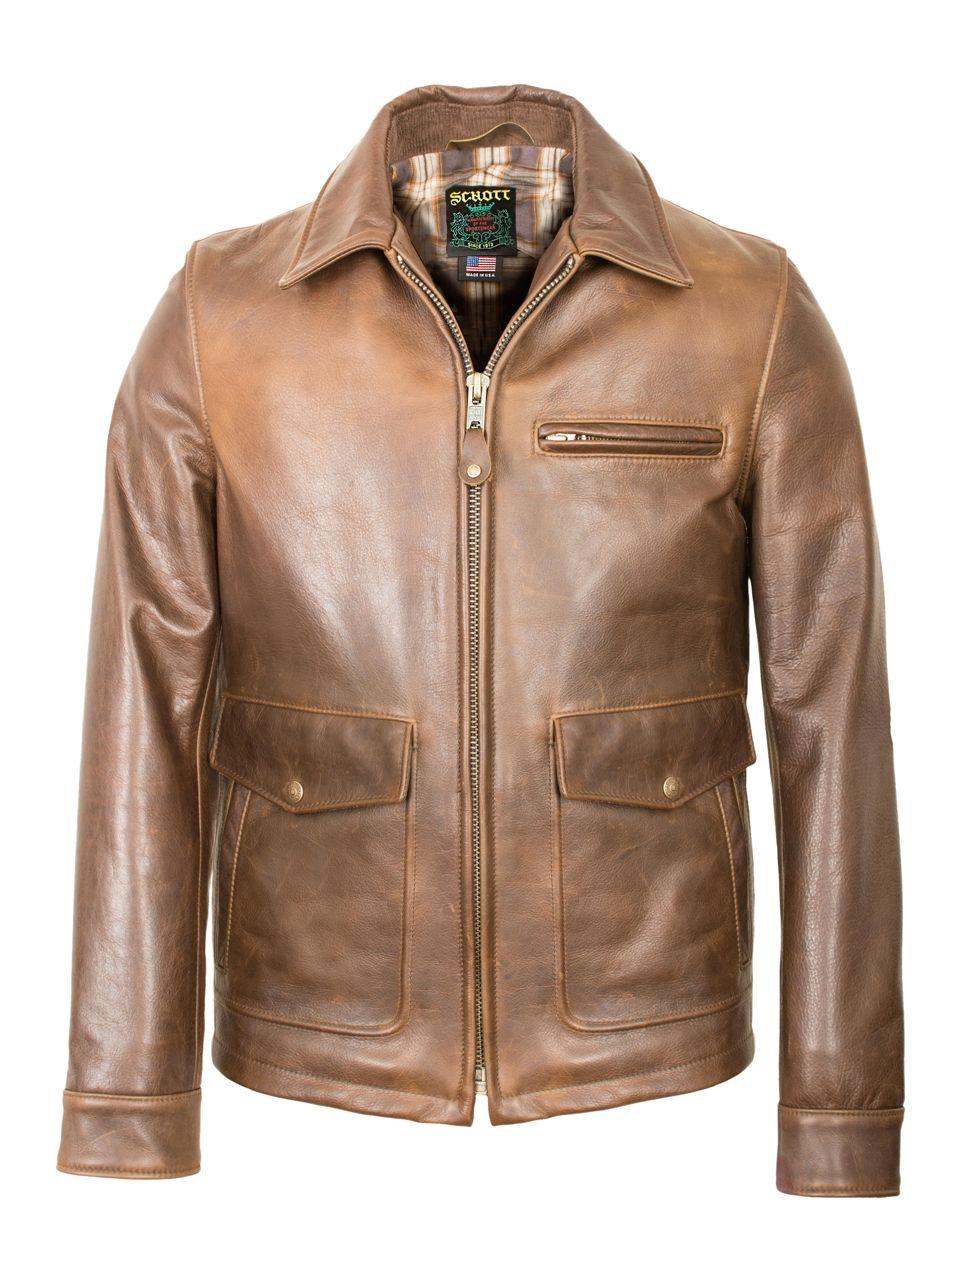 Lyst - Schott Nyc Burnished Leather Delivery Jacket in Brown for Men